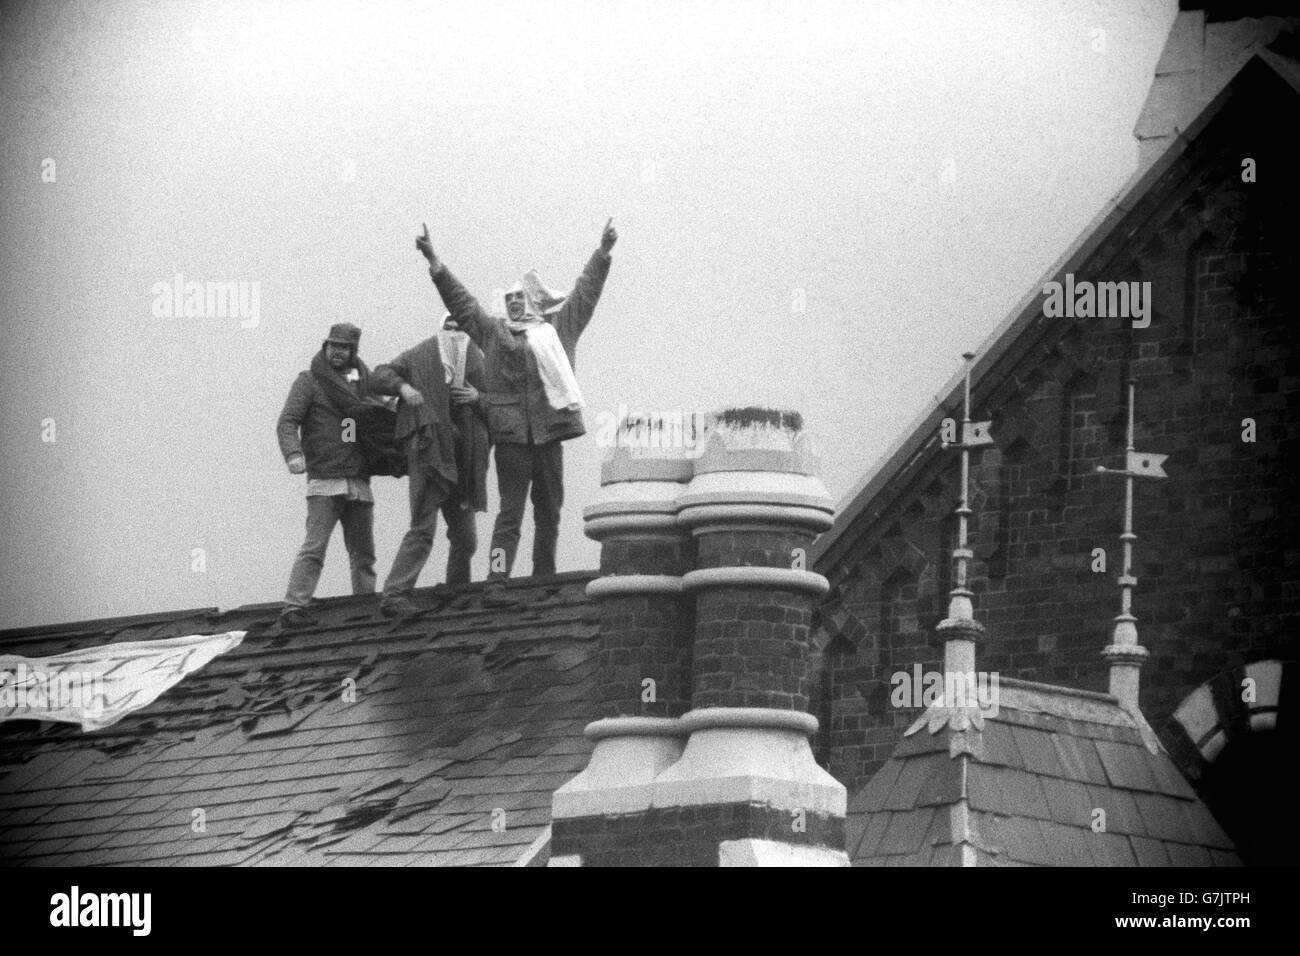 Defiant inmate on the roof of Strangeways prison in Manchester. Stock Photo